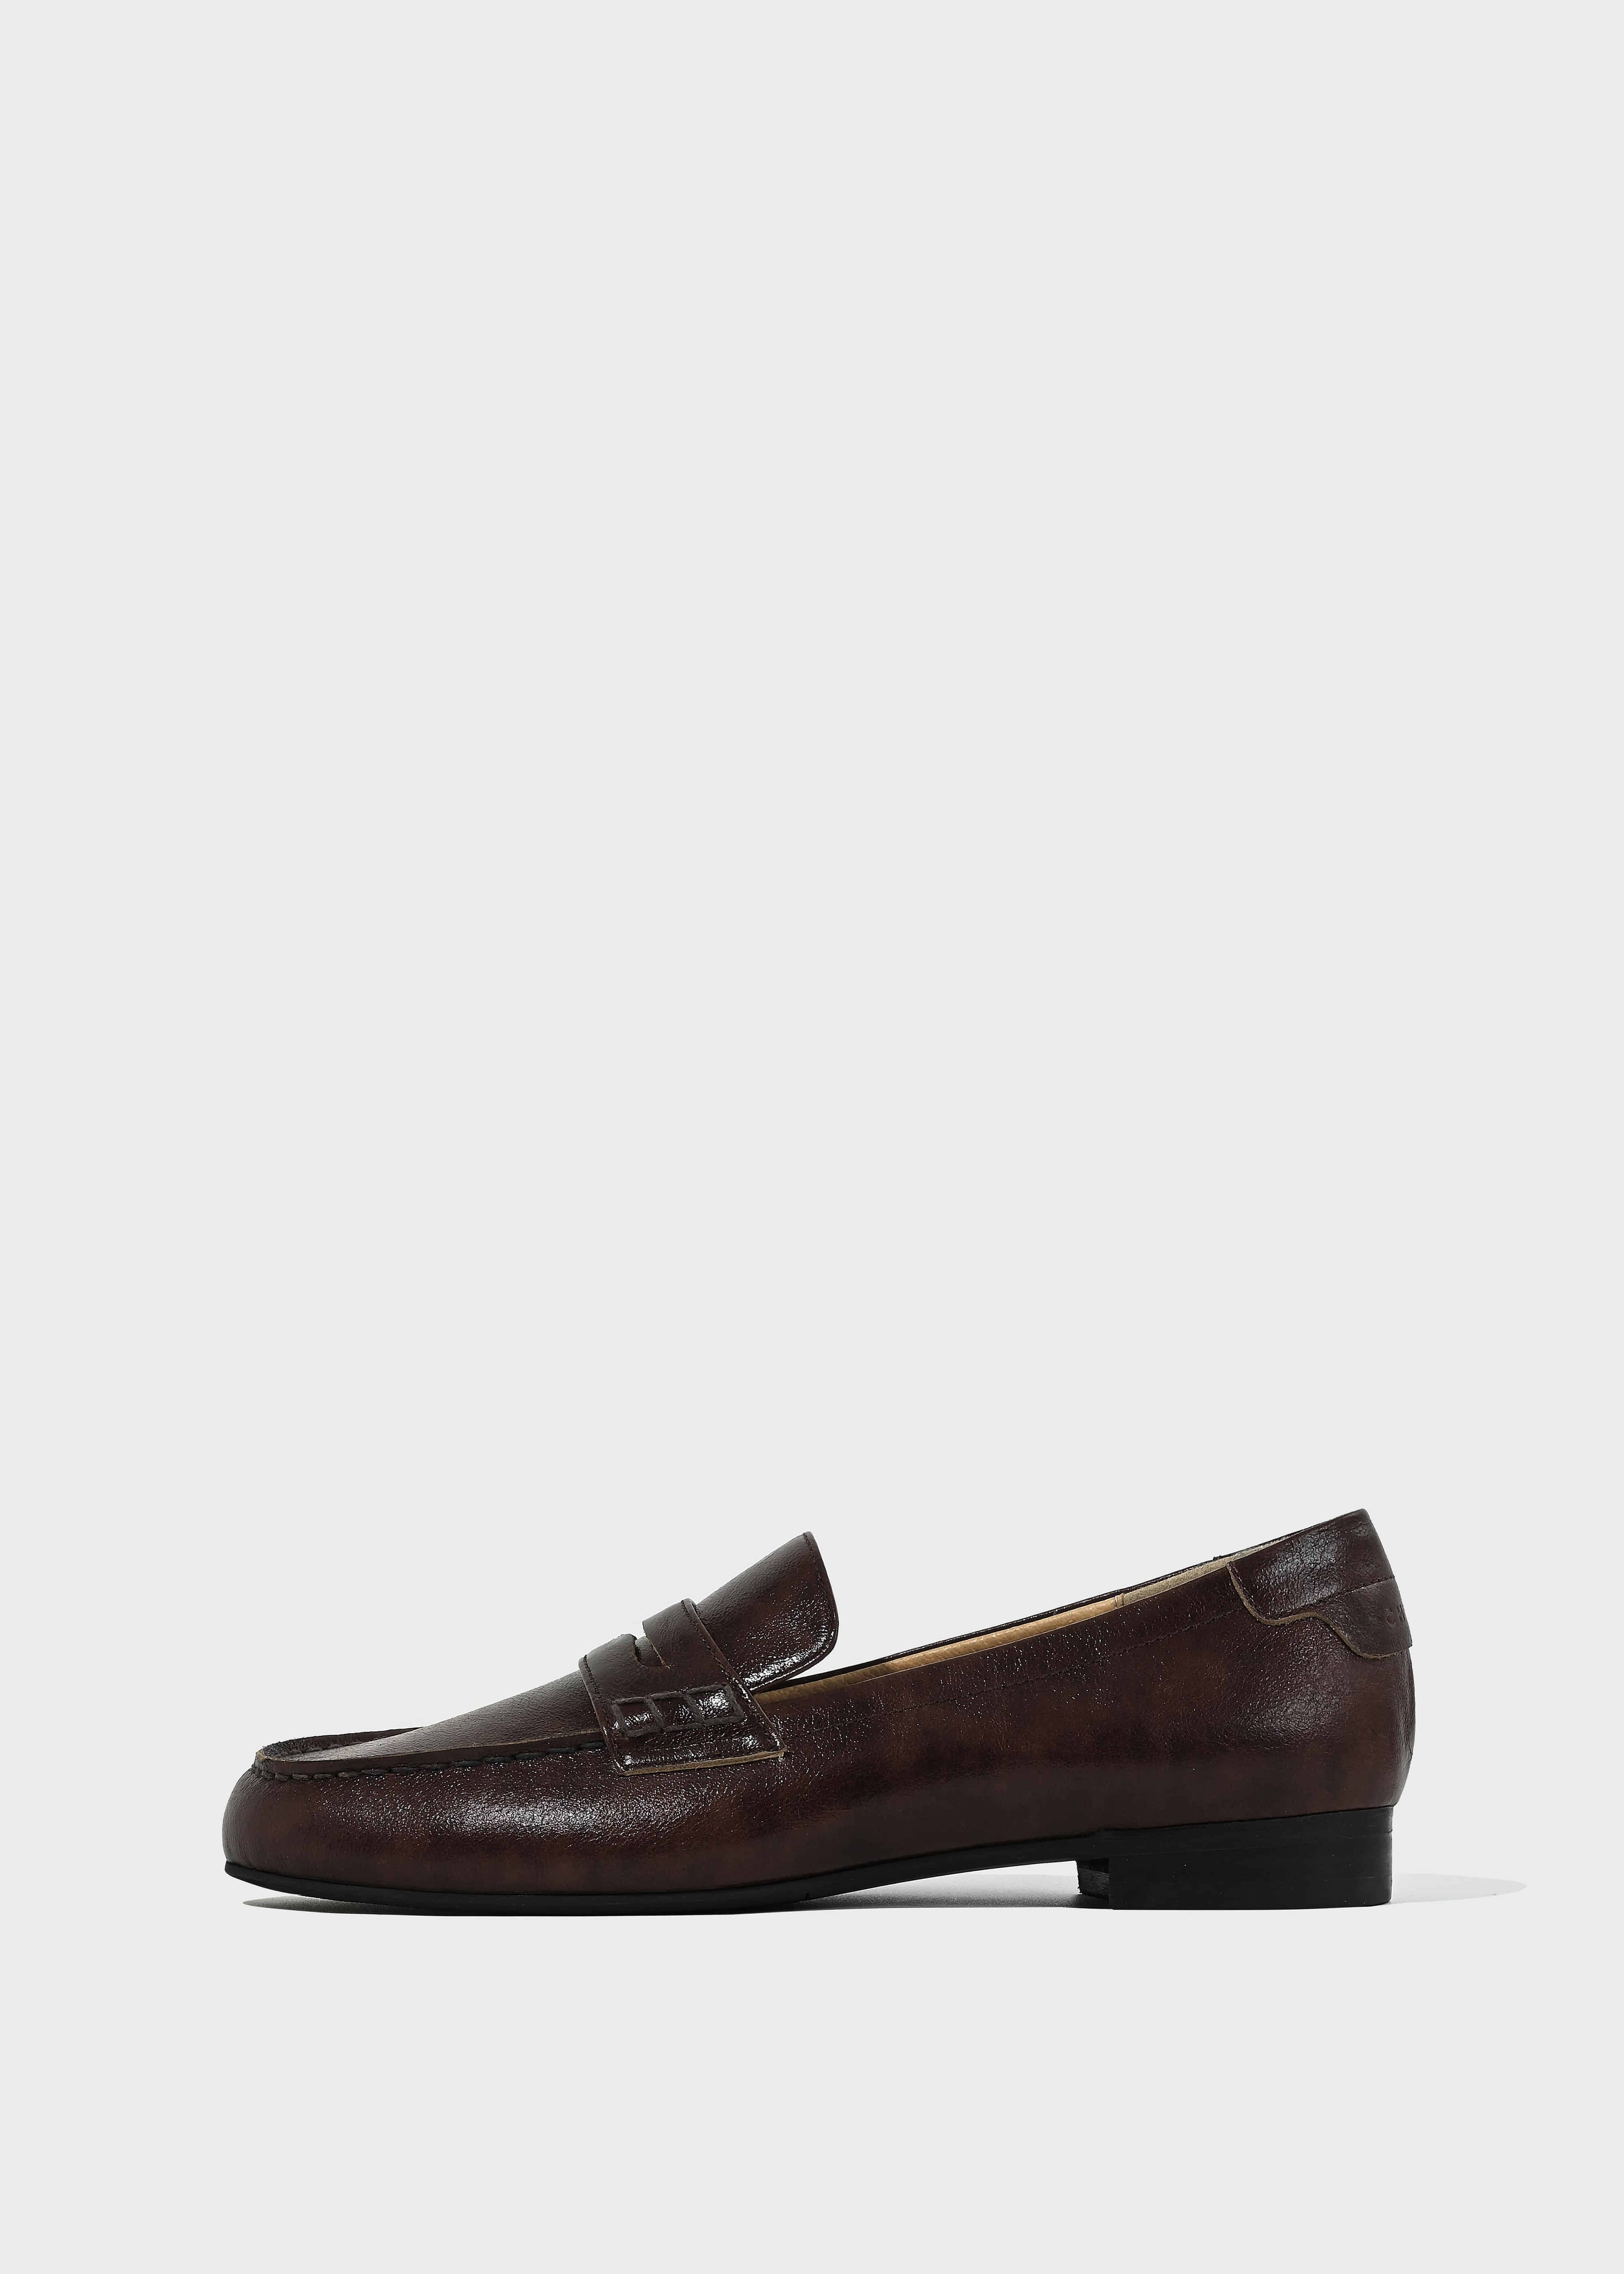 CLASSIC LOAFER  [C3S01 BR]